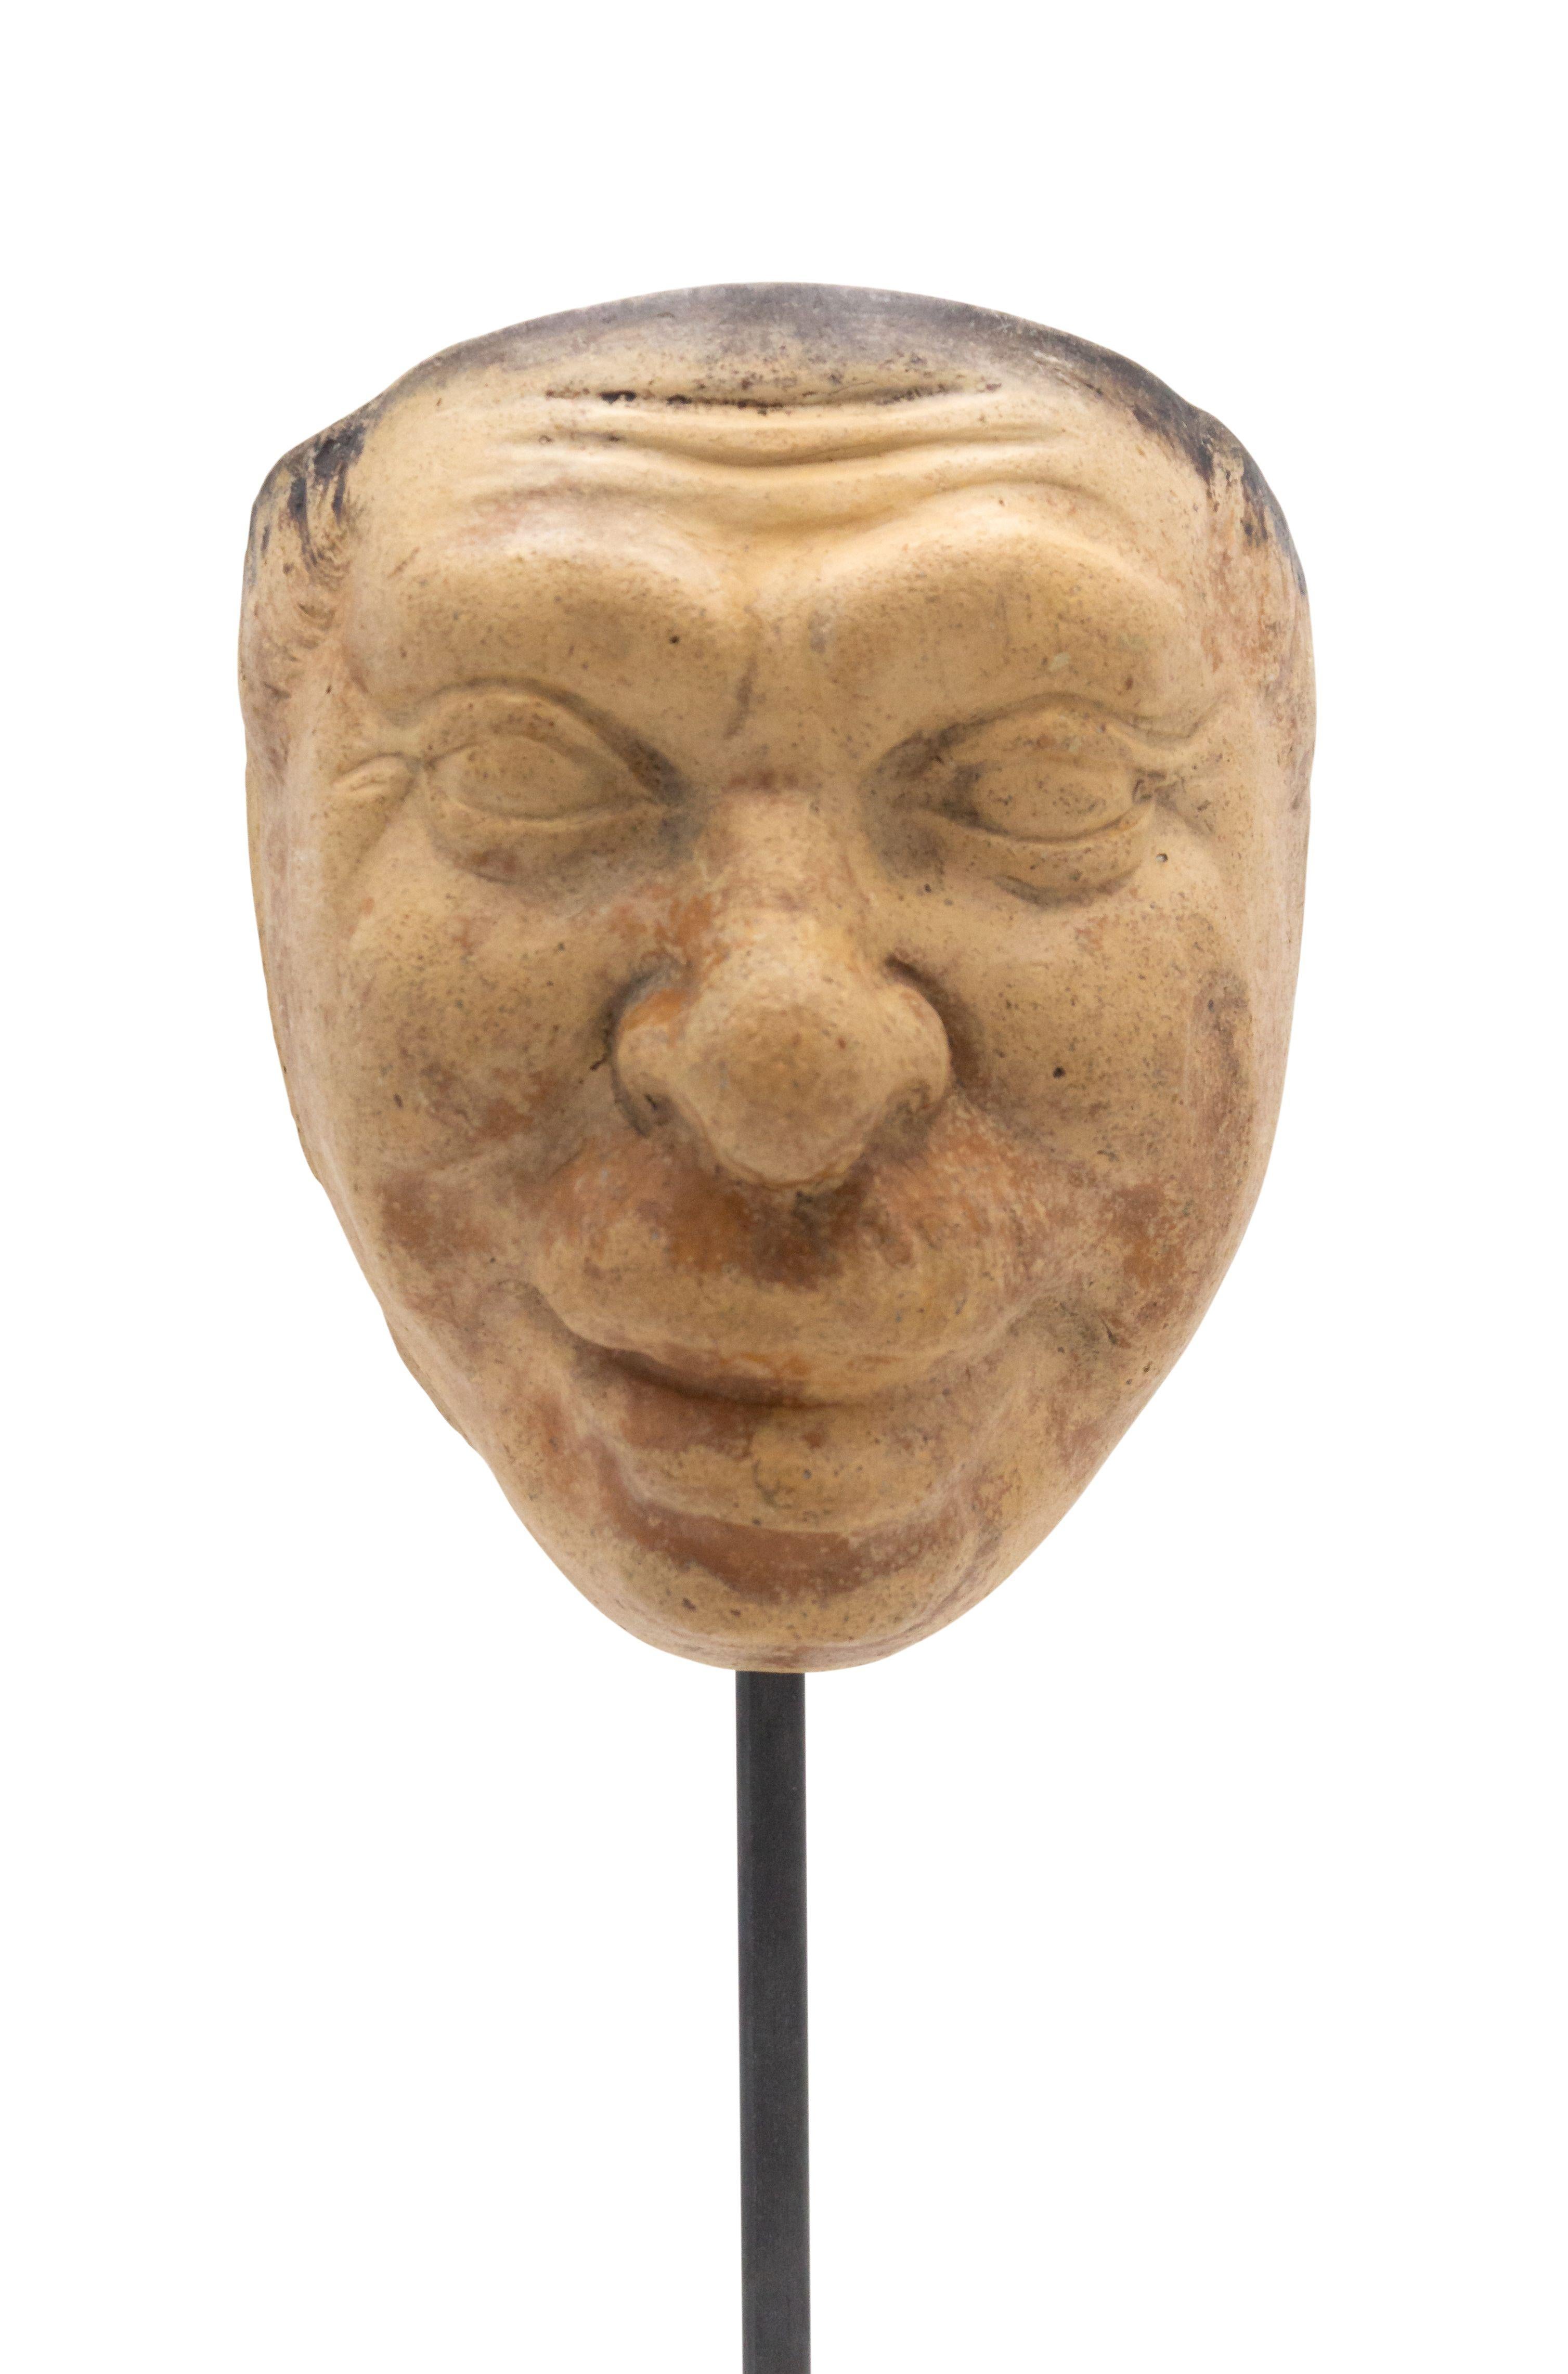 Continental German (late 19th Cent) sculpted terra-cotta master mask mold of a smiling Grotesque face with a mustache displayed on a square black marble base stand (part of 39 pc. Collection).
 